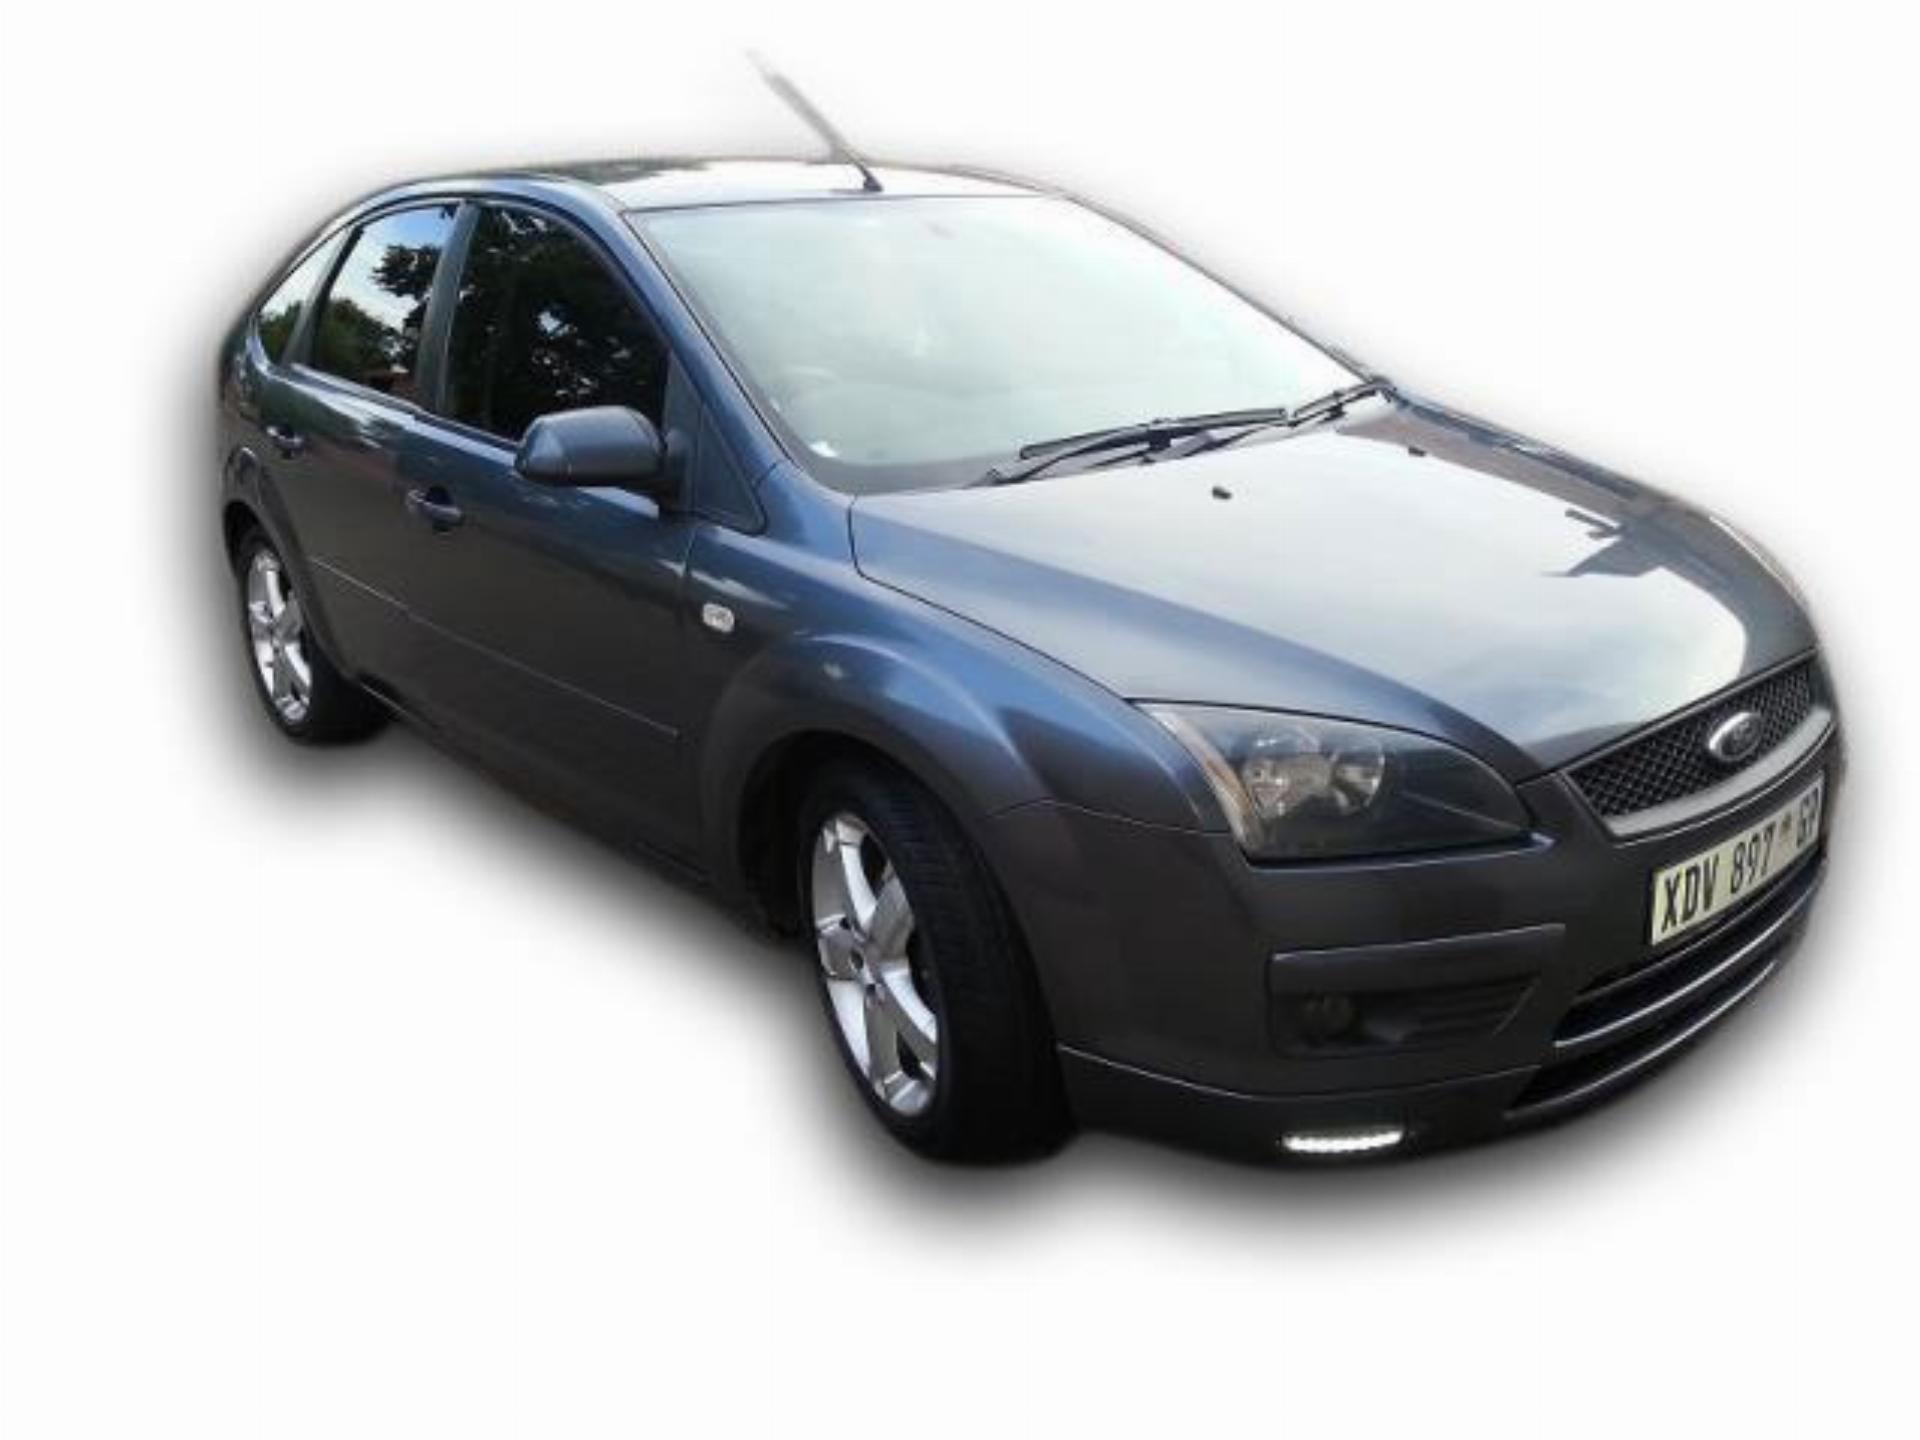 Ford Focus 1.6 SI 5 DR